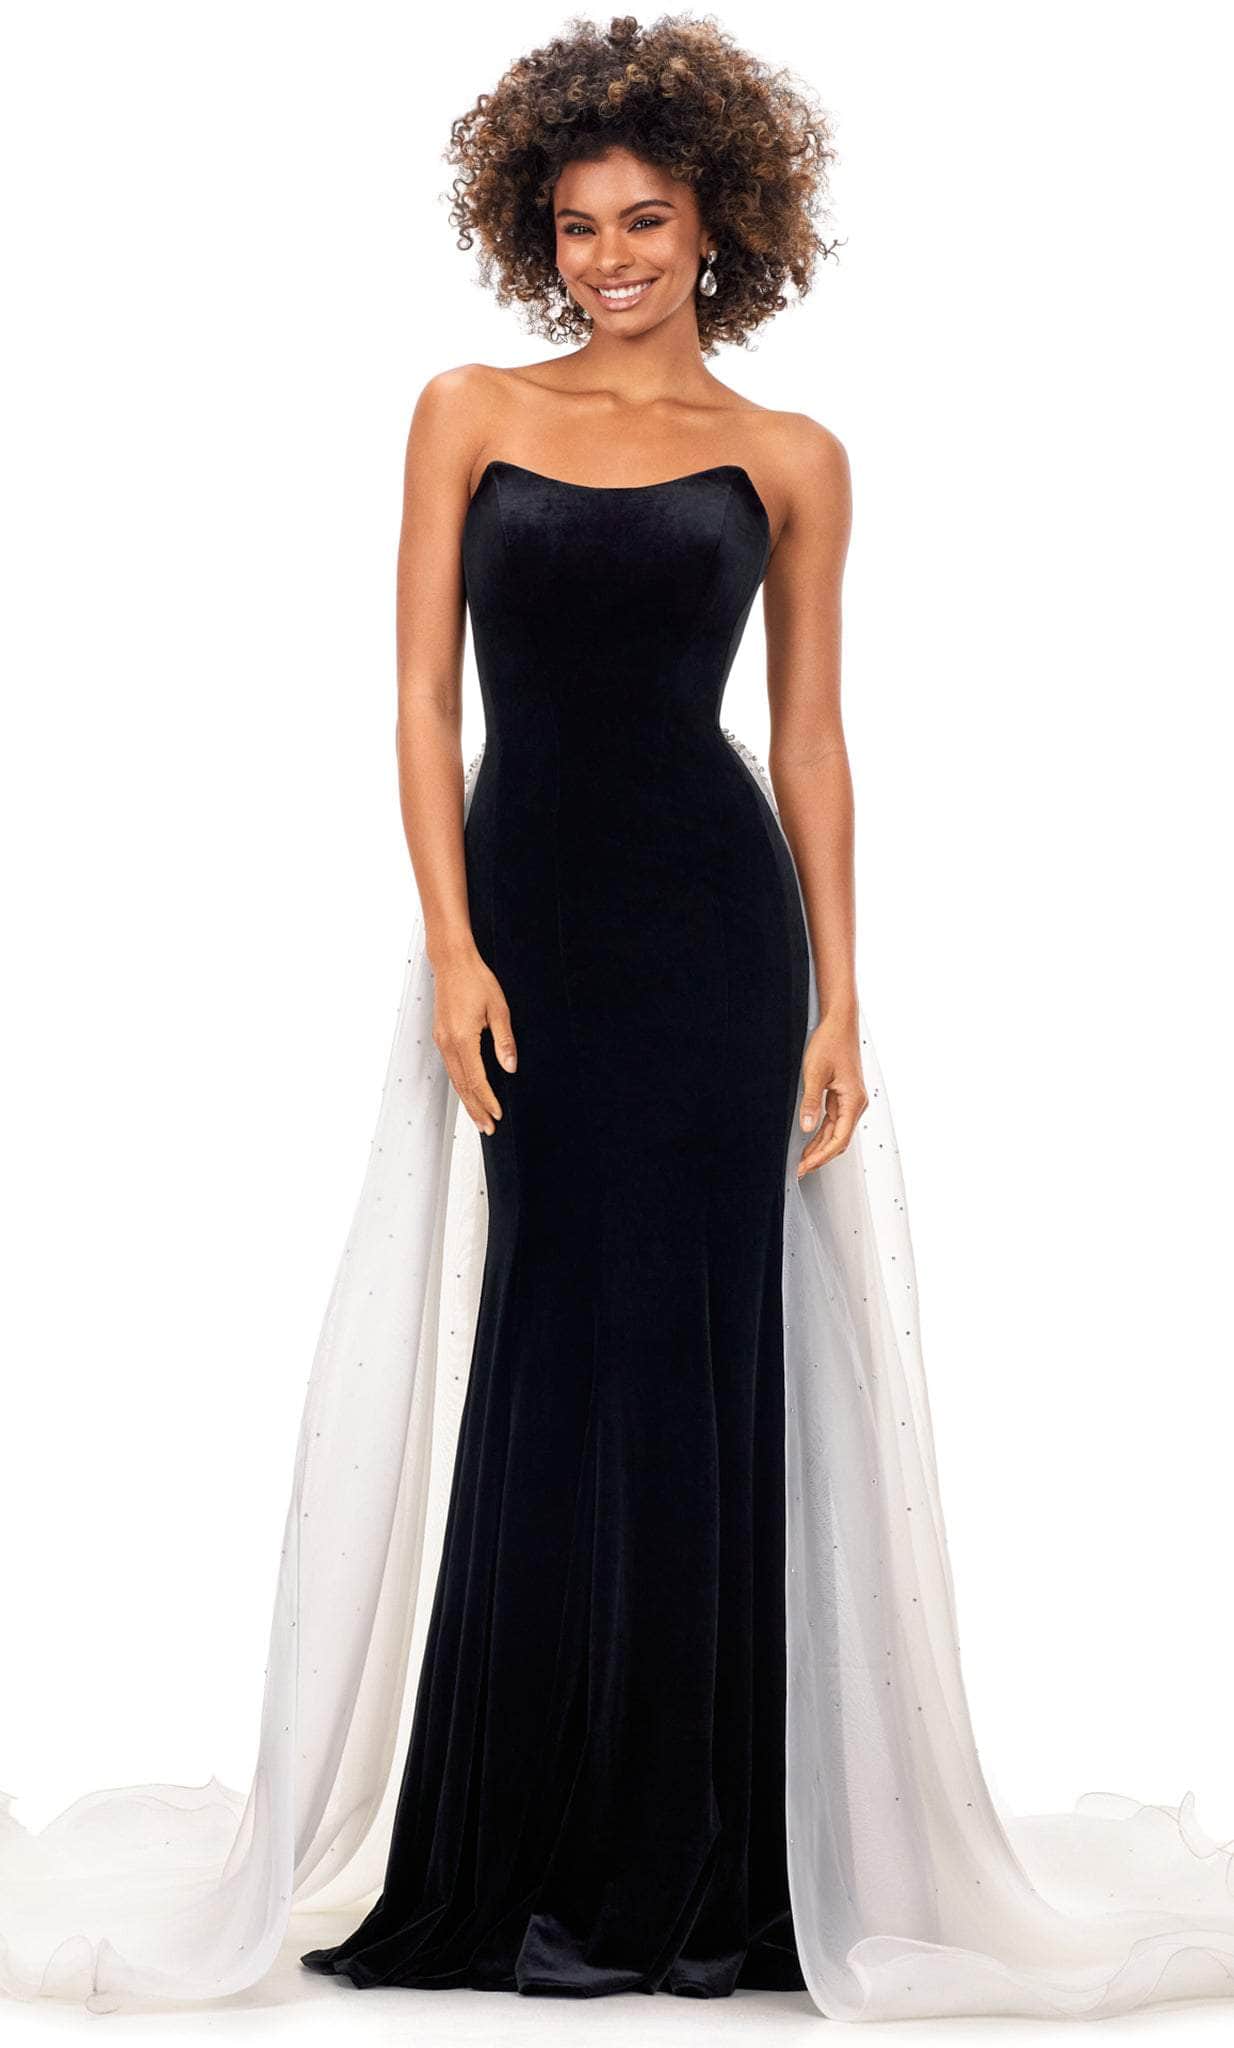 Plus Size Black Mermaid Velvet Black Velvet Evening Gown With Jewel  Neckline, Lace Detailing, Half Sleeves, And Sweep Train Perfect For Prom  And Formal Occasions For Women From Weddingsalon, $114.58 | DHgate.Com